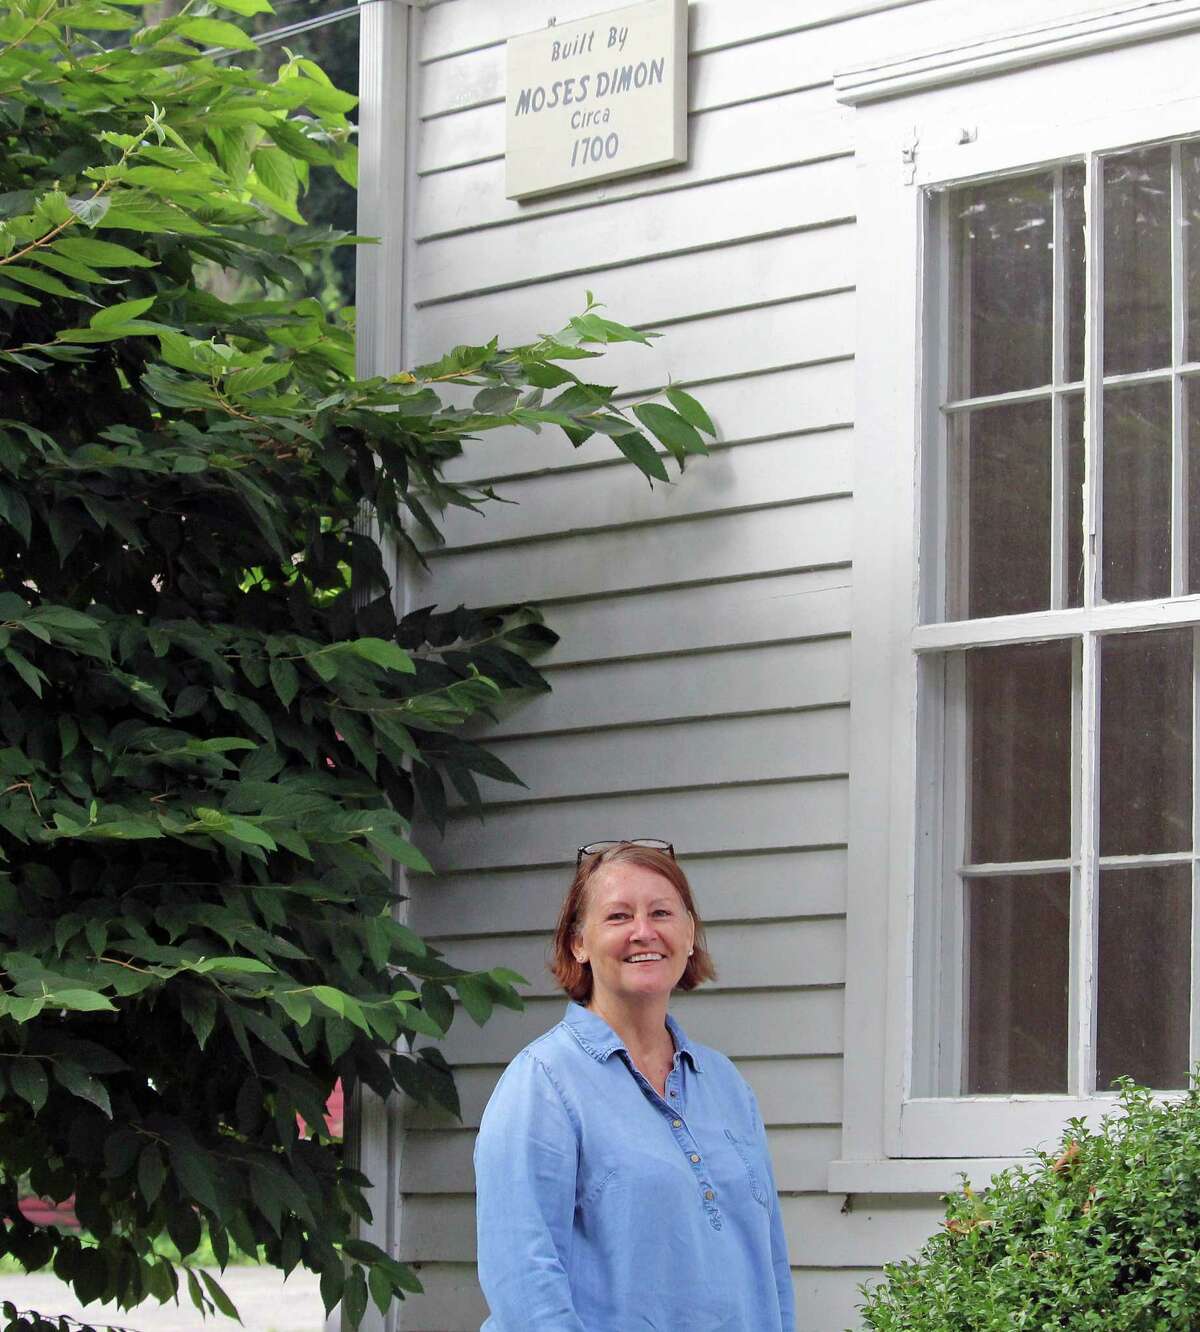 Melanie Marks, owner of Connecticut House Histories, may have found her next project -- researching the Bronson Road home she just purchased. The plaque says 1700, but Marks has been told it may have been built even earlier than that. Fairfield,CT. 8/2/17